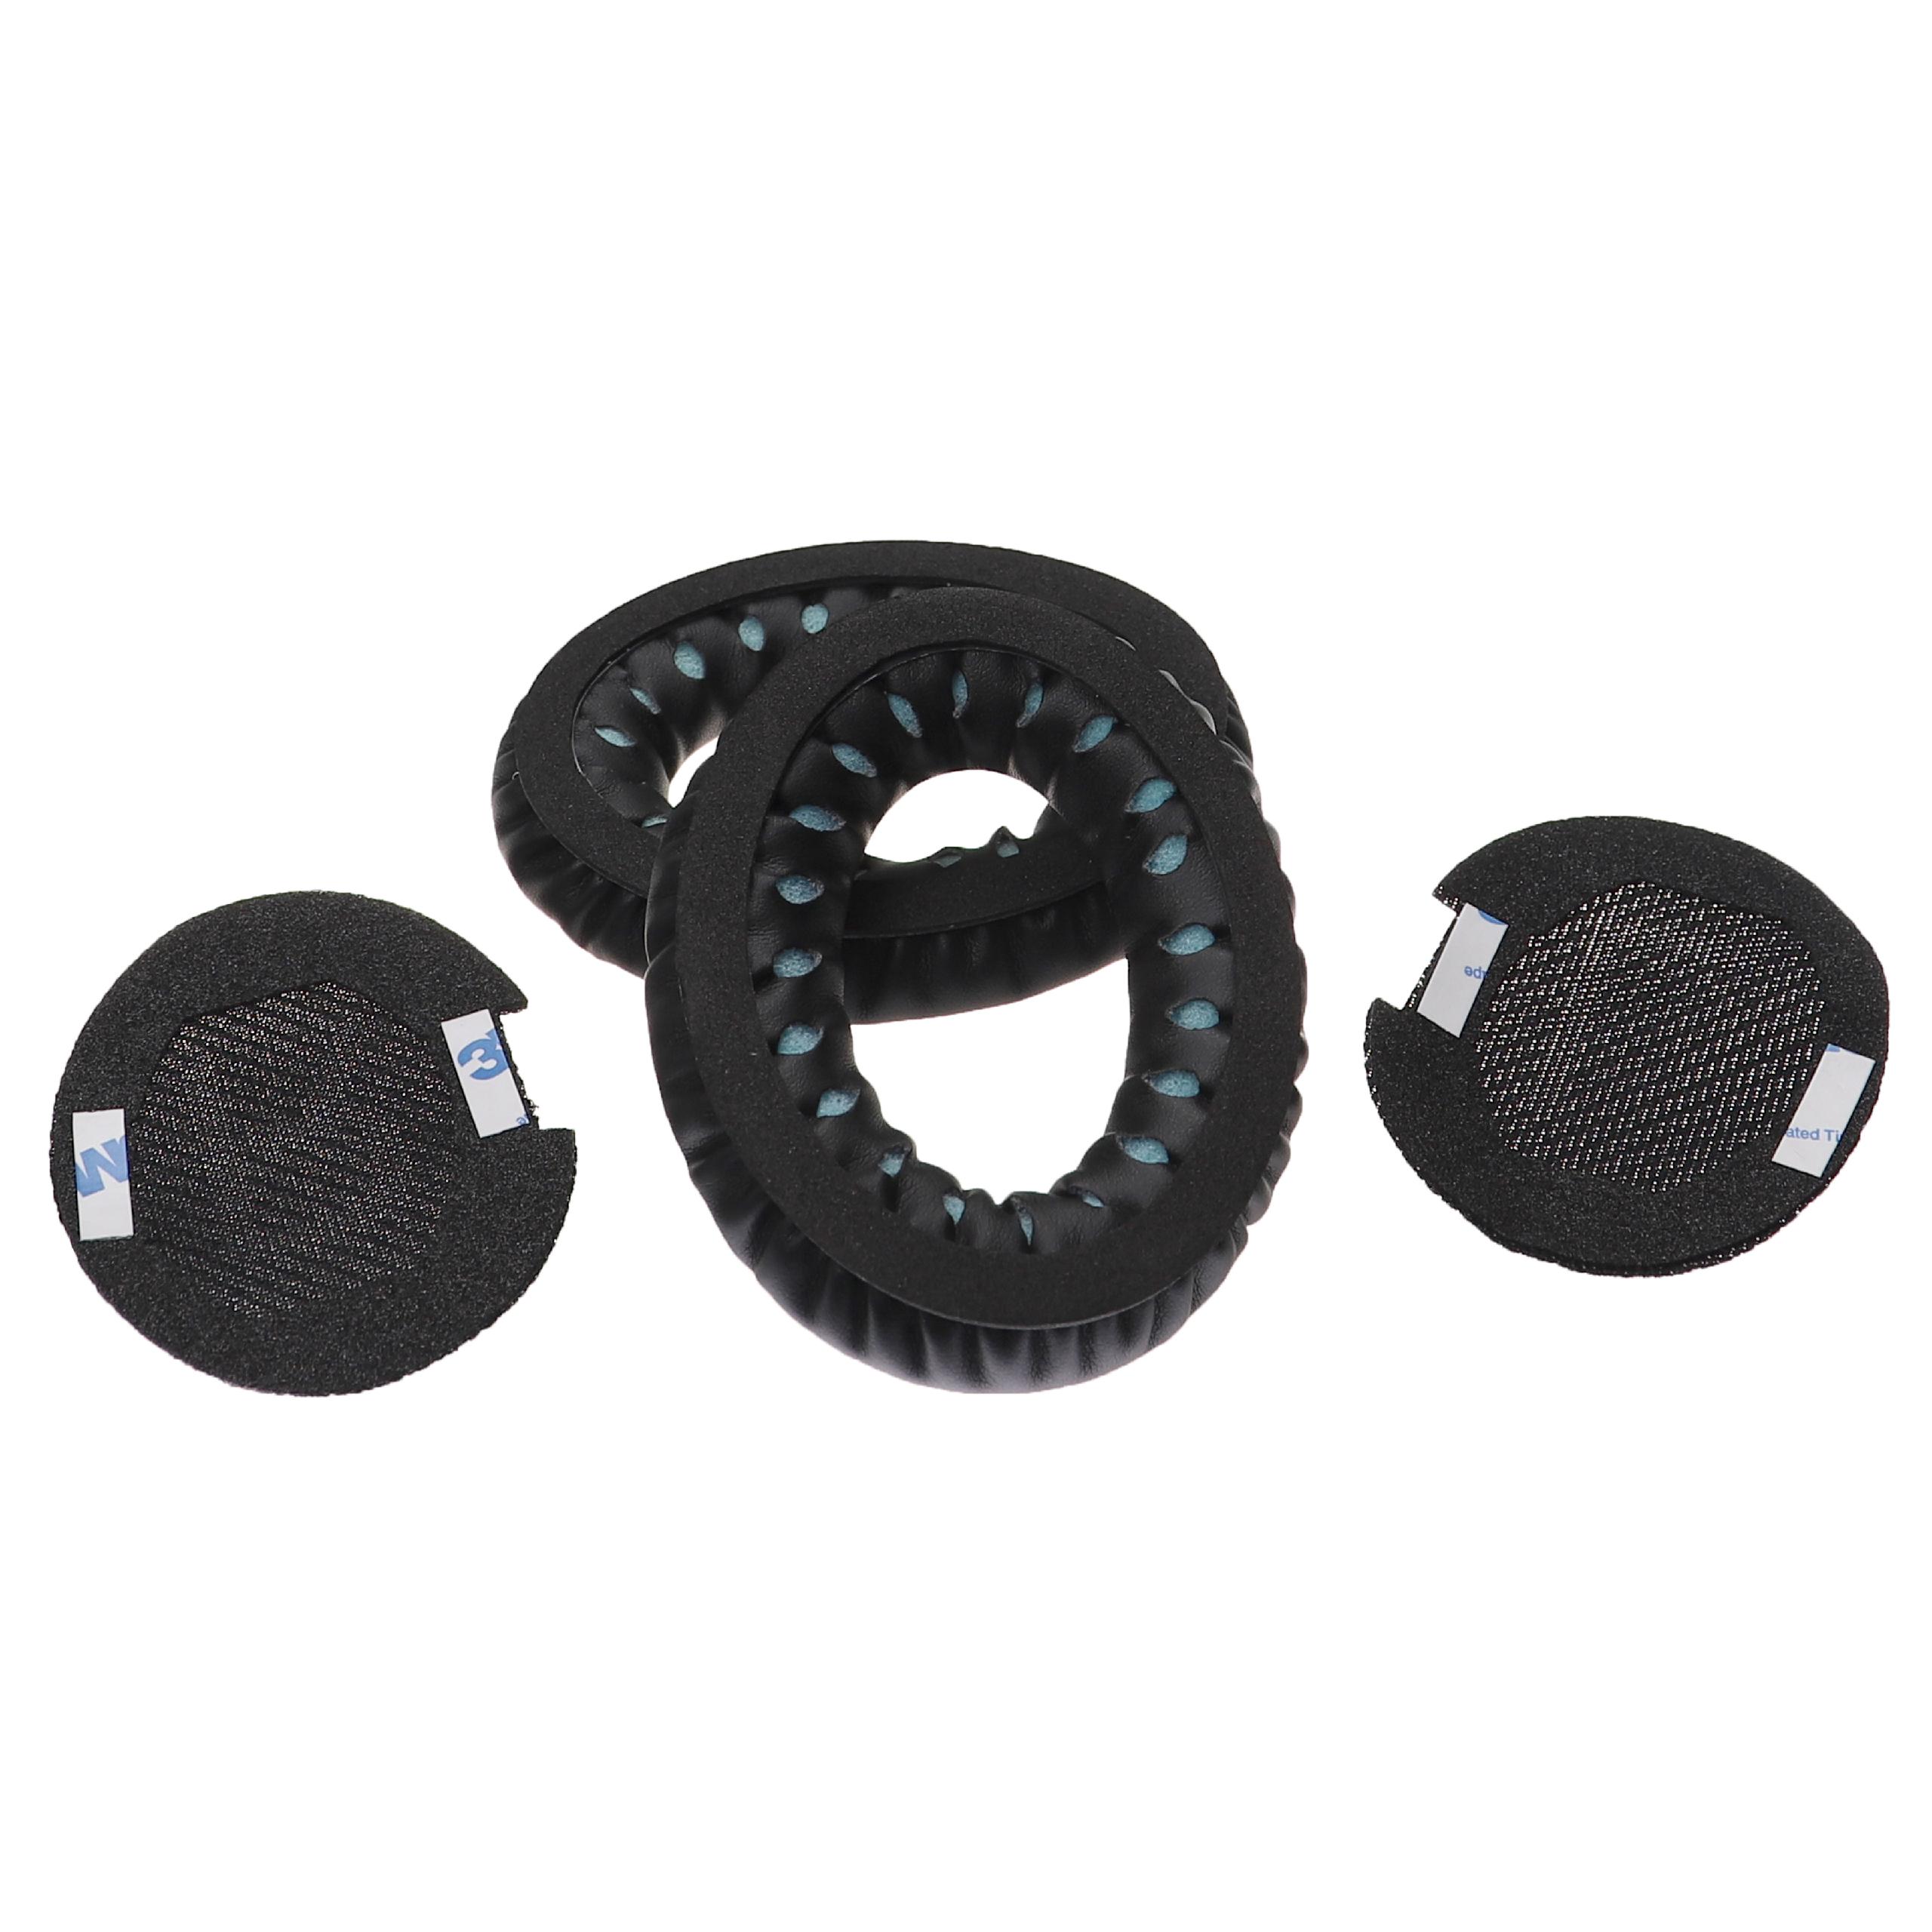 Ear Pads suitable for Bose AE2 Headphones etc. - with Memory Foam, Soft Material, 41 mm thick